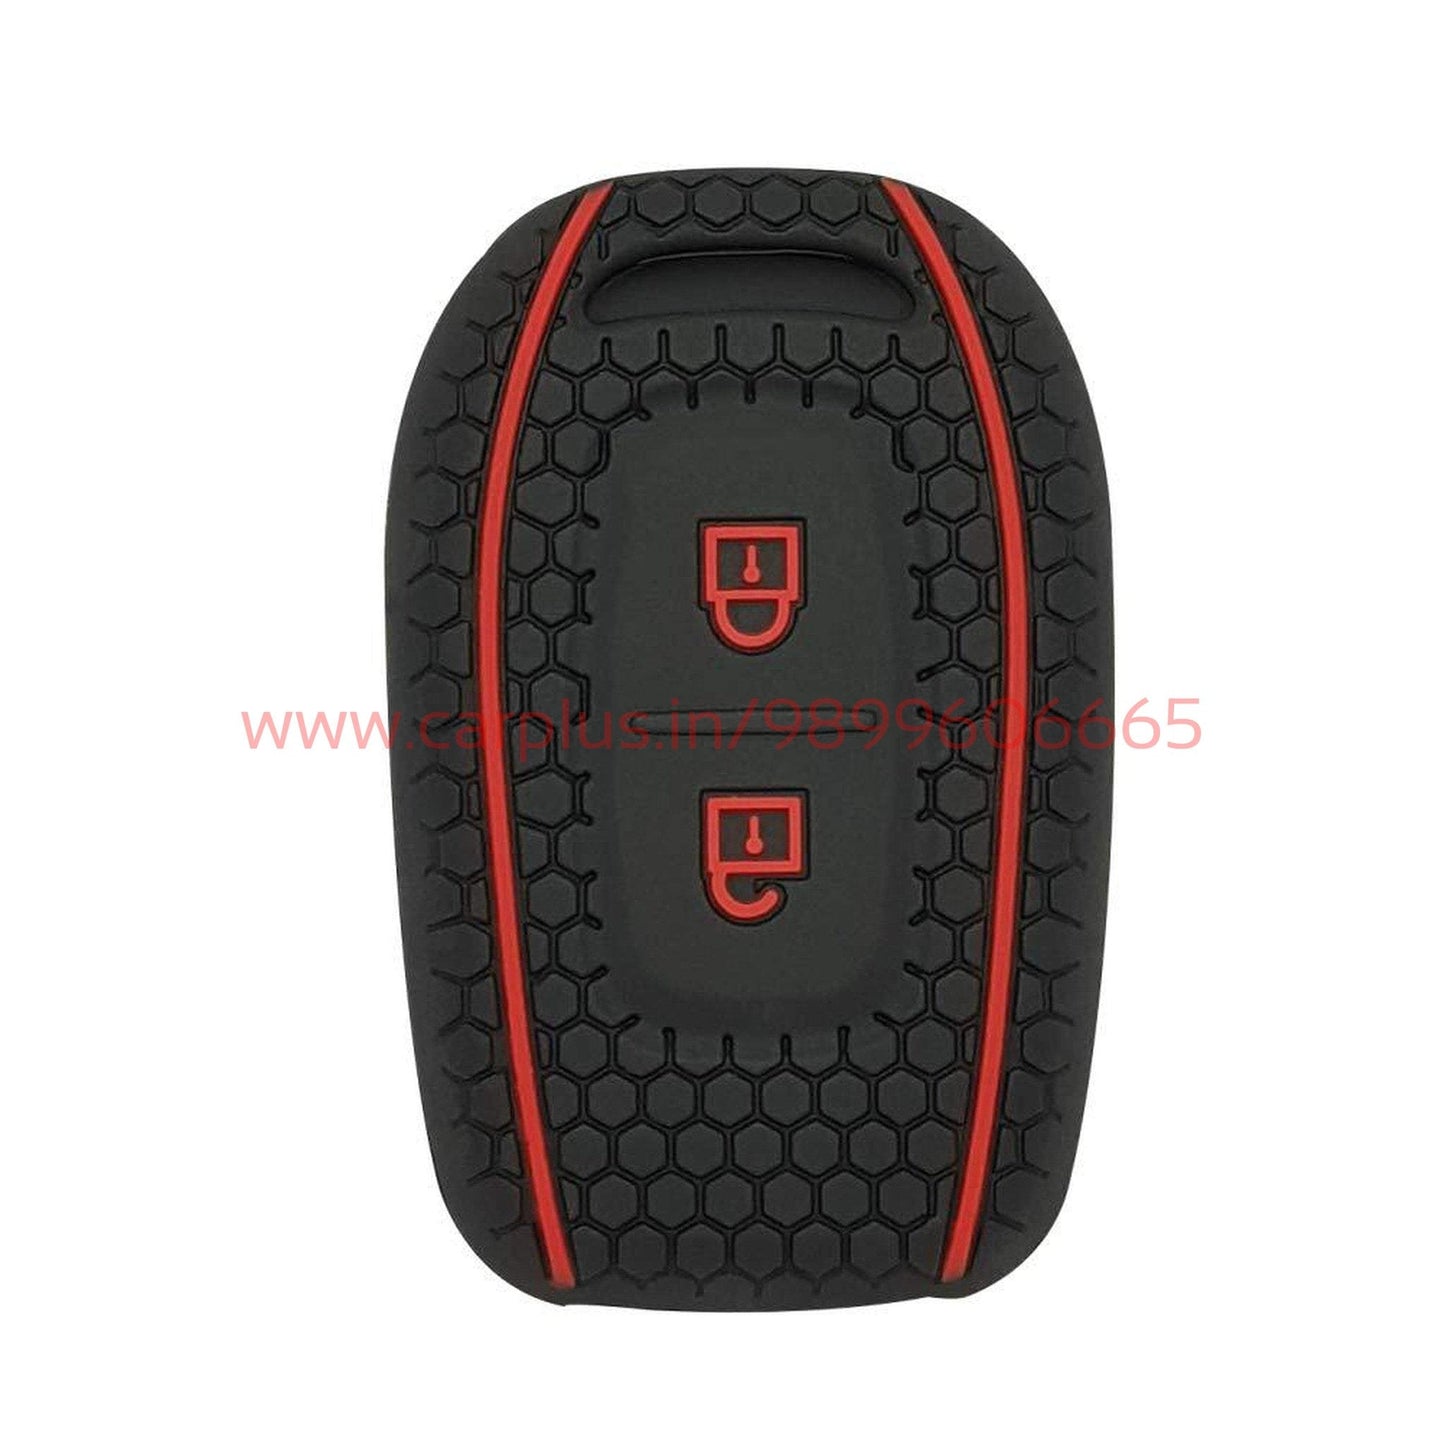 
                  
                    KMH Silicone Cover KC-17 for Renault KEY CARE KEY COVER.
                  
                